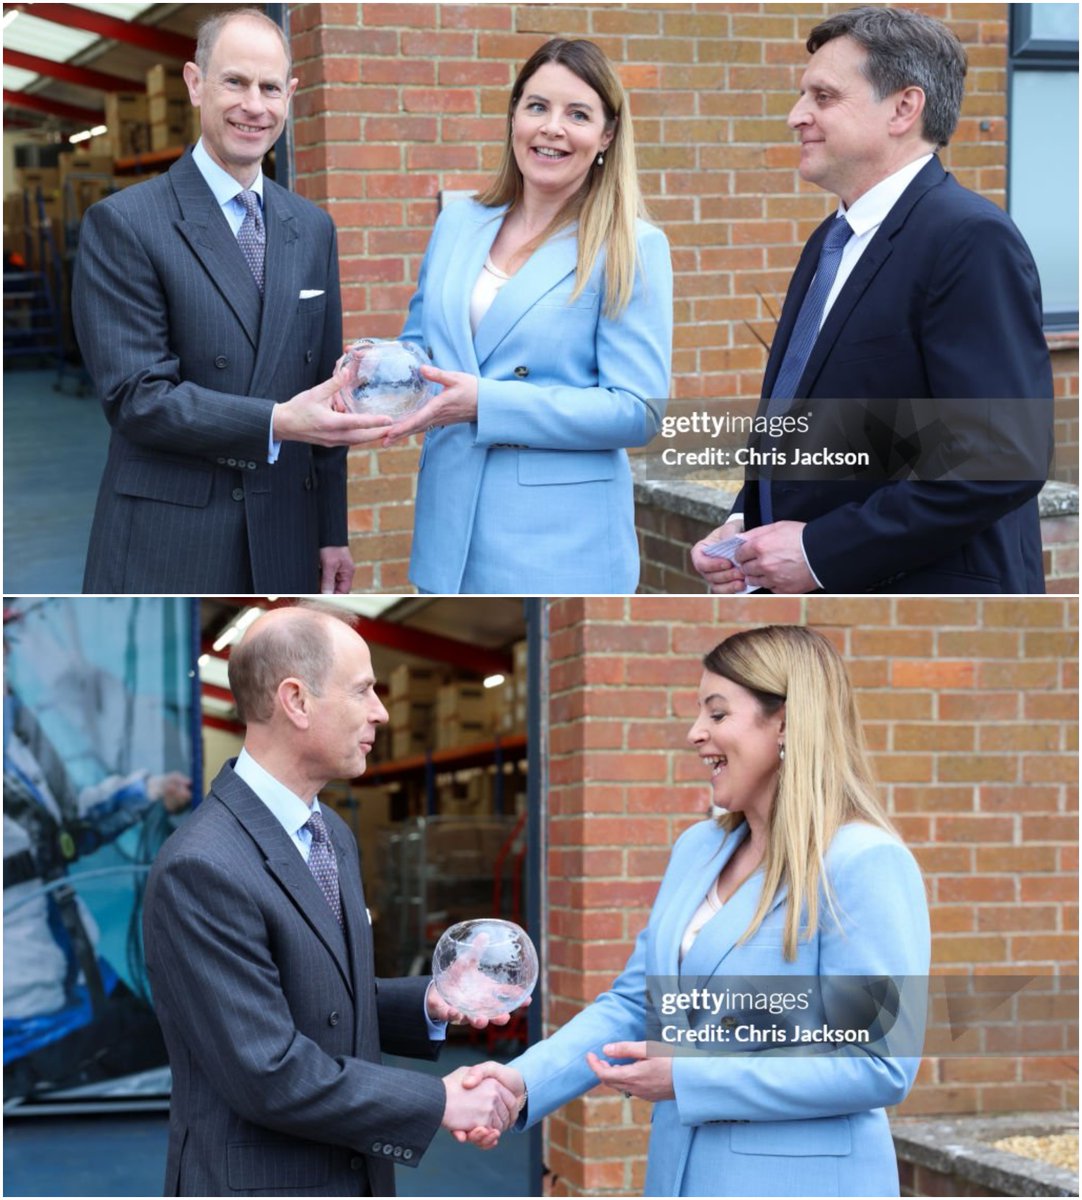 Prince Edward, Duke of Edinburgh presents Director and Co-Owner, Spinlock Production Facility, Caroline Senior and Director and Co-Owner, Spinlock Production Facility, Chris Hill with the Kings Award for Enterprise for Innovation. (📸 Chris Jackson/Getty Images)